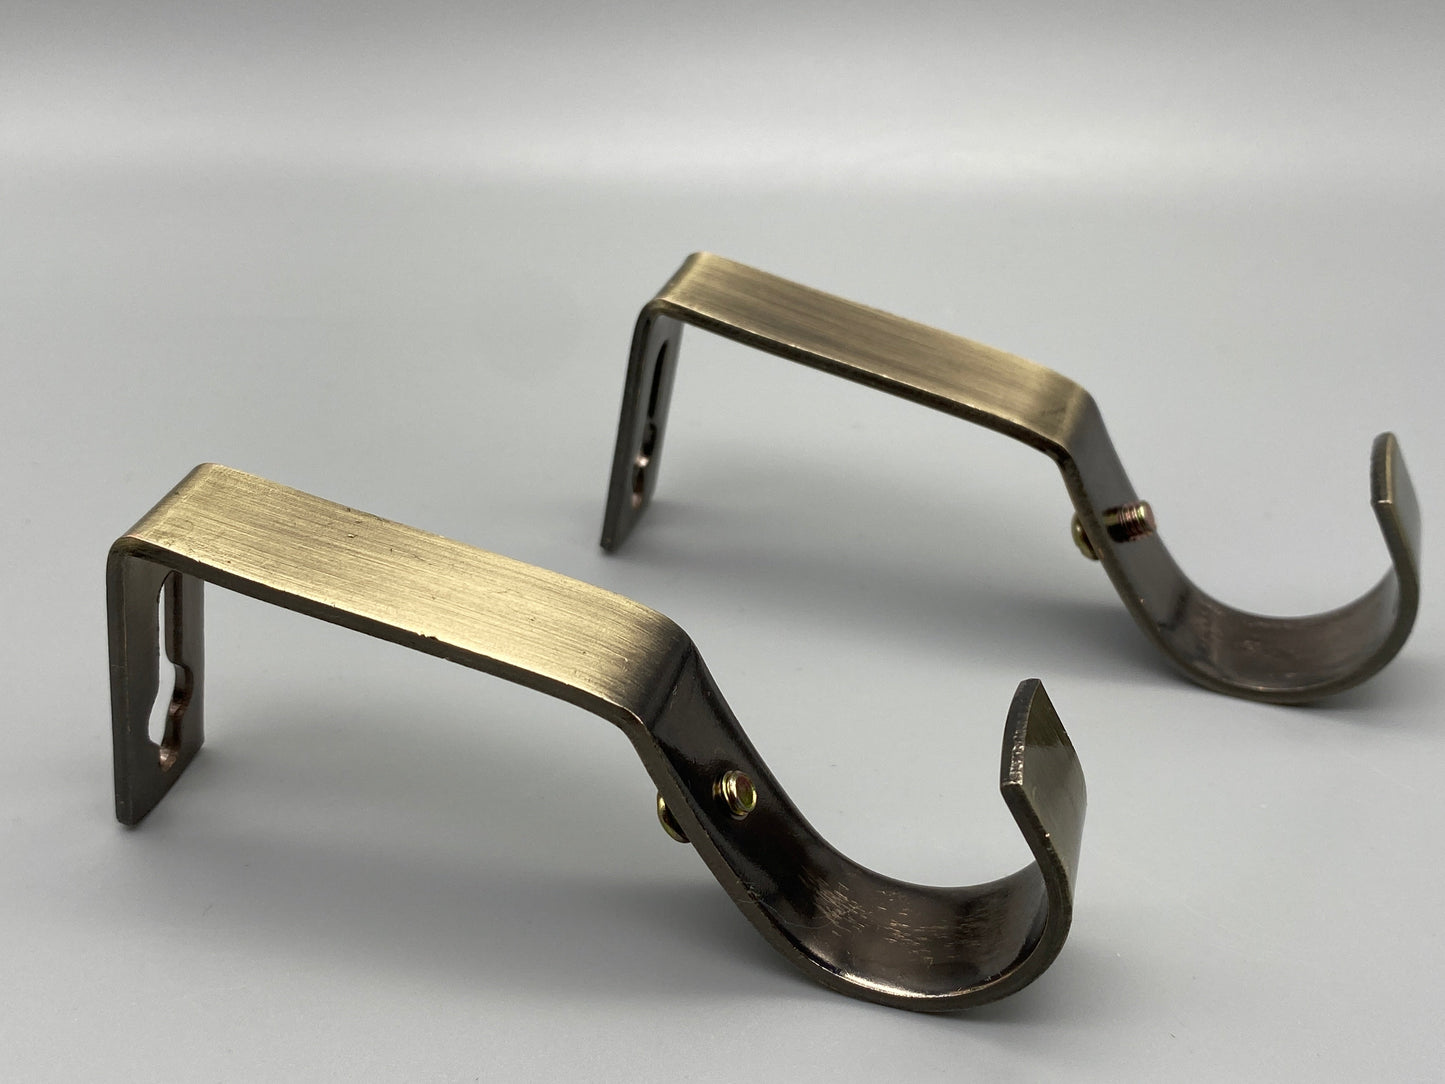 Pair of Heavy Duty Metal Curtain Pole Brackets - Holds Rods upto 19mm - Wall Brackets Holder (Antique Gold)